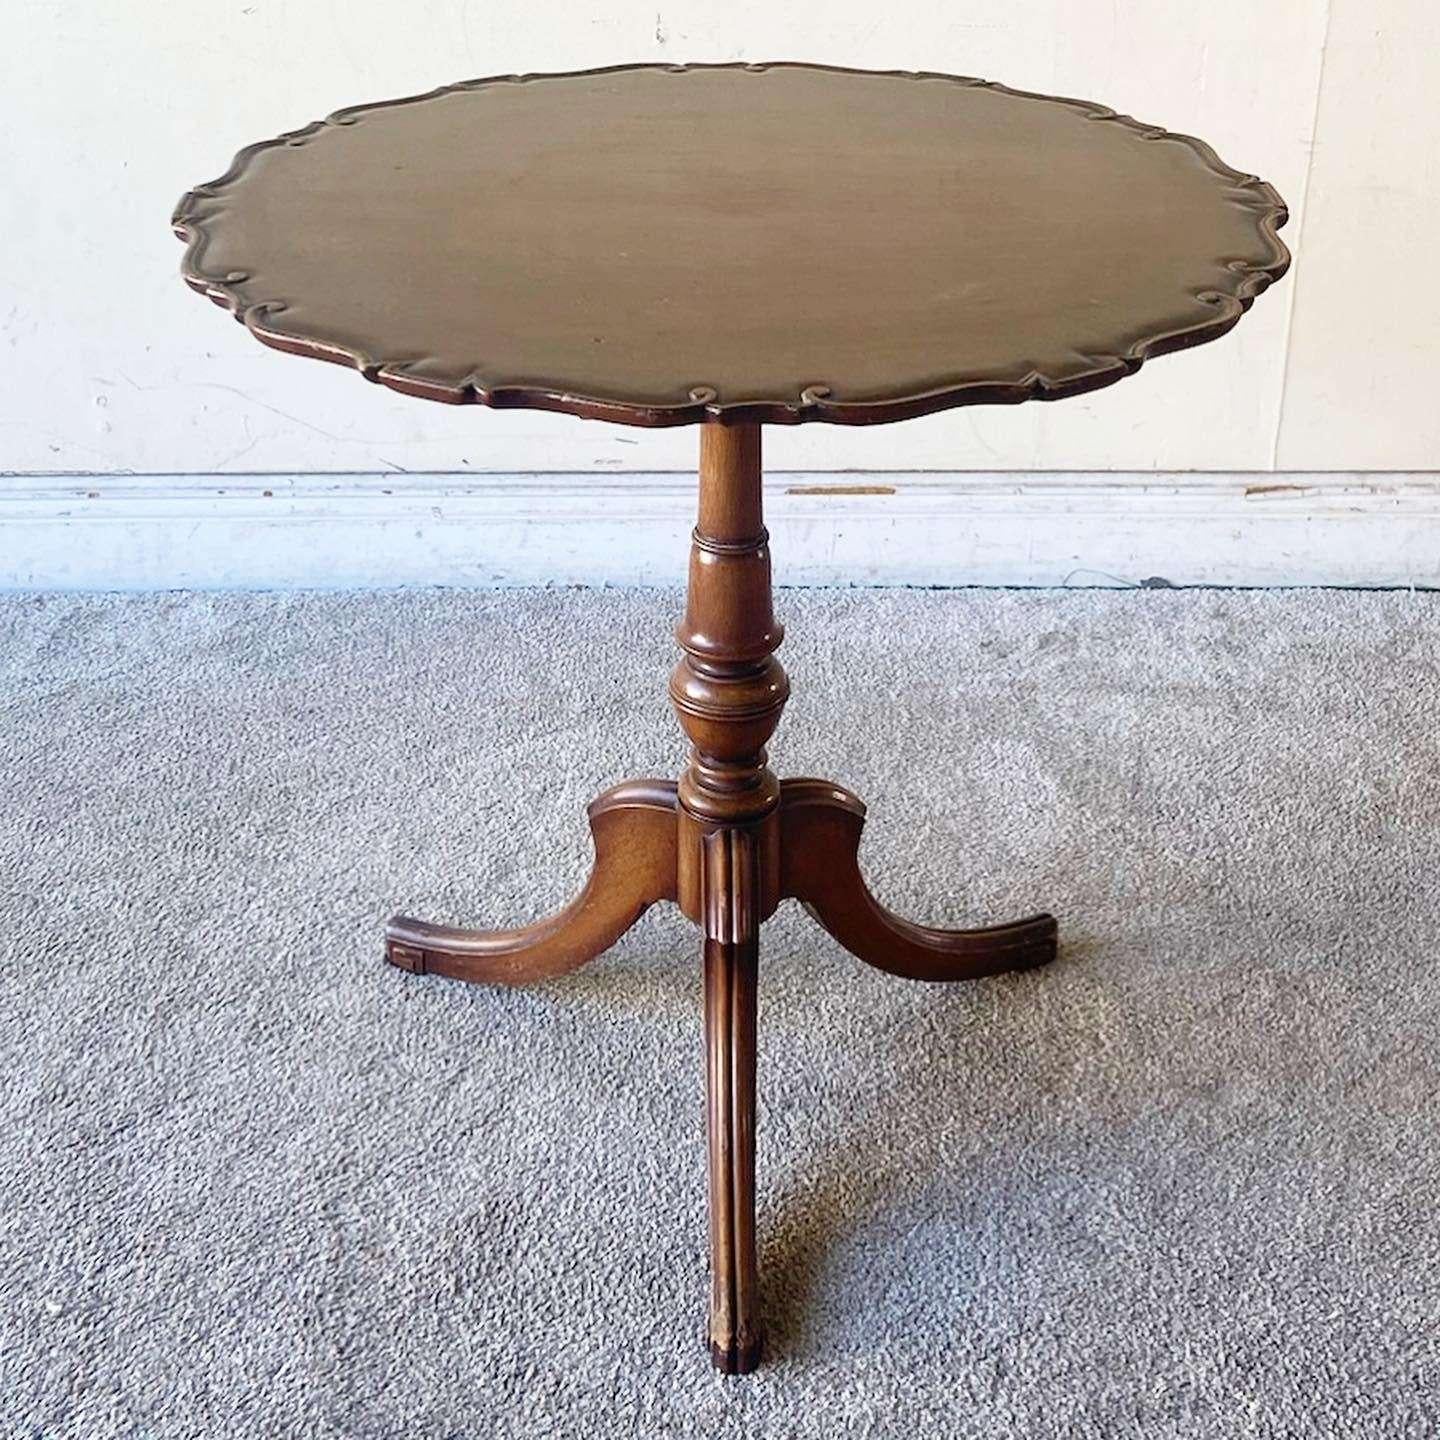 Exceptional antique English pie crust table. Features a mahogany finish with a three leg pedestal base.